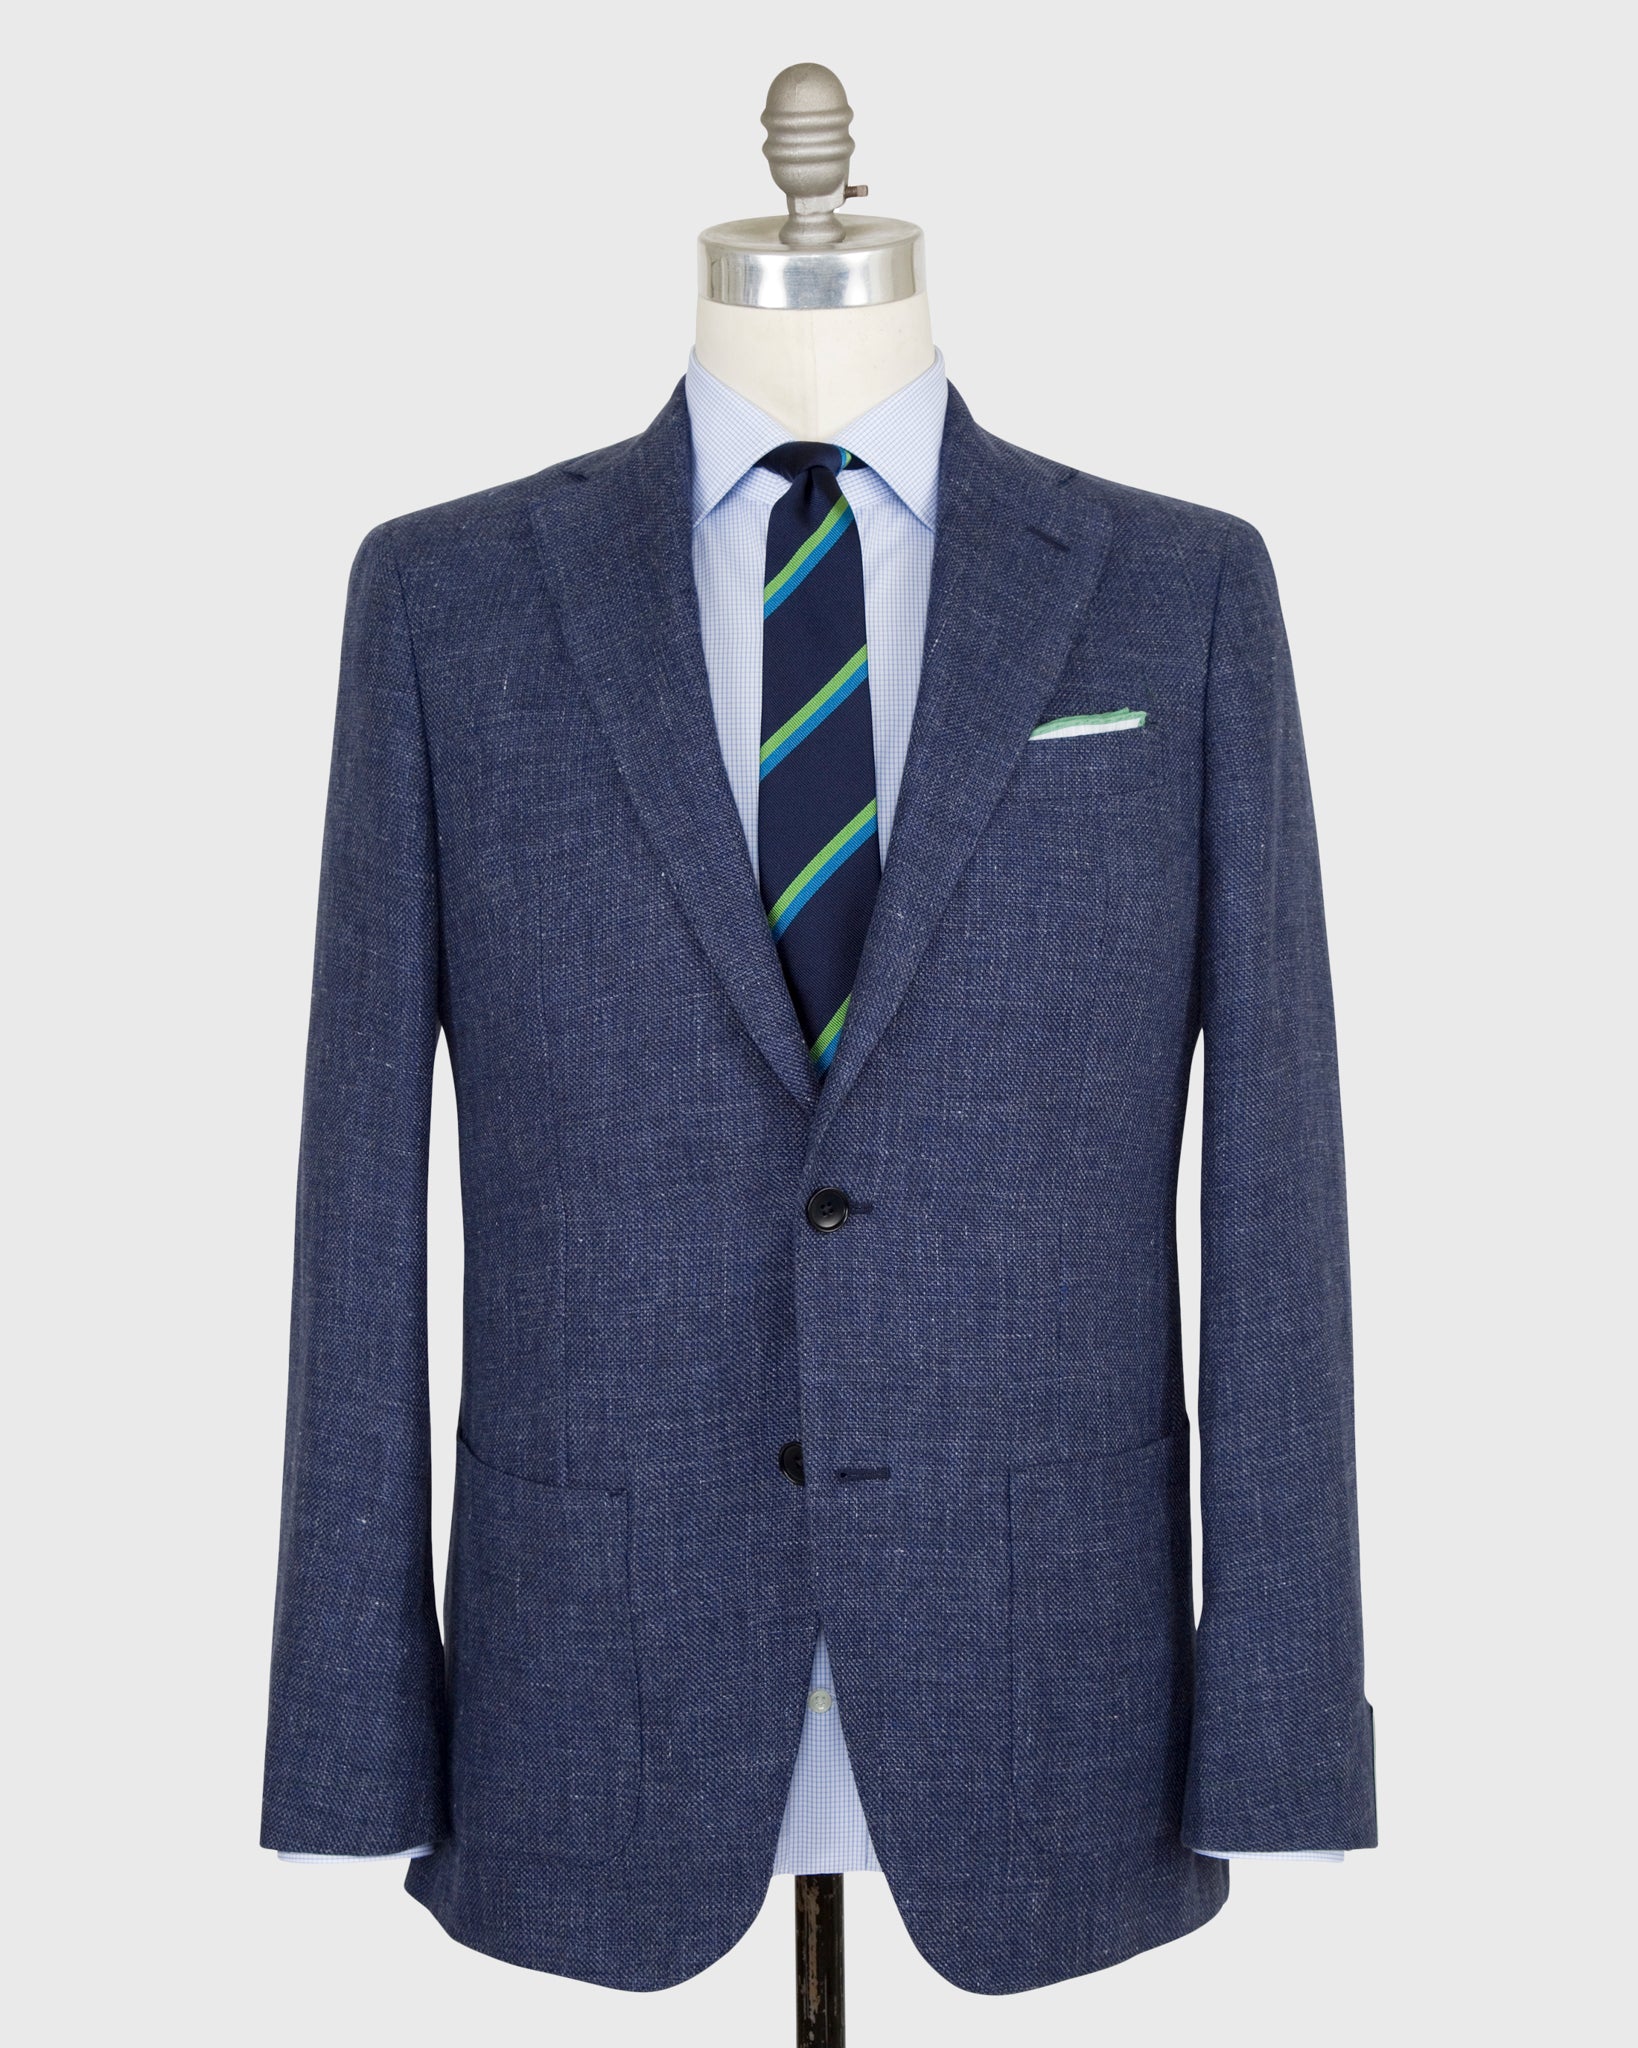 Kincaid No. 2 Jacket in Blue Mix Linen/Wool Hopsack